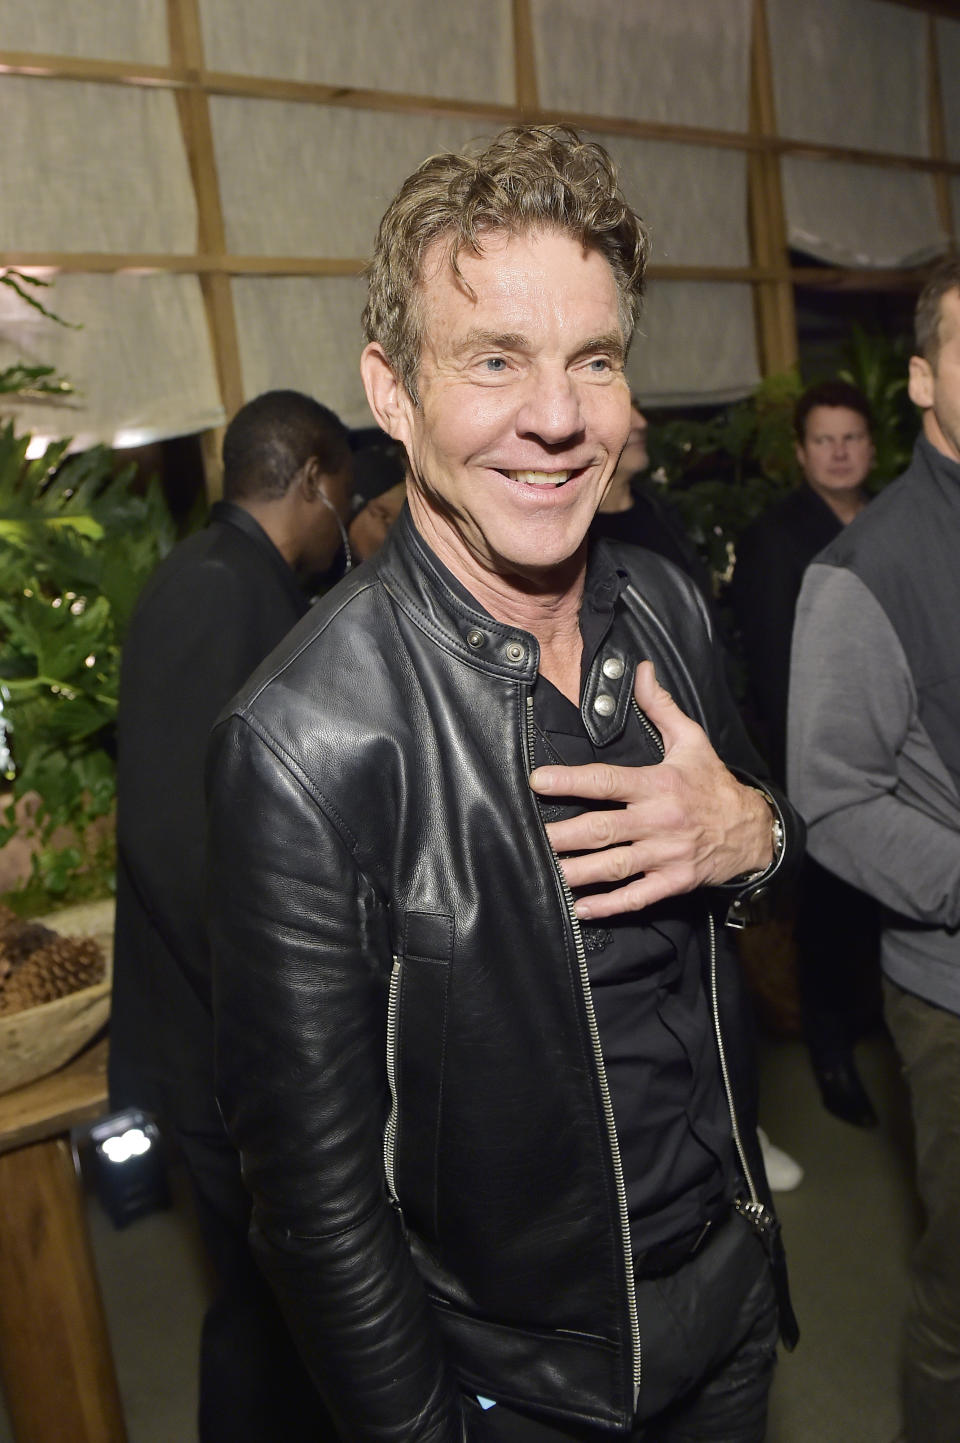 Dennis Quaid attends FIJI Water At Republic Records 2020 Grammy After Party on January 26, 2020 in West Hollywood, California. (Photo by Stefanie Keenan/Getty Images for FIJI Water)